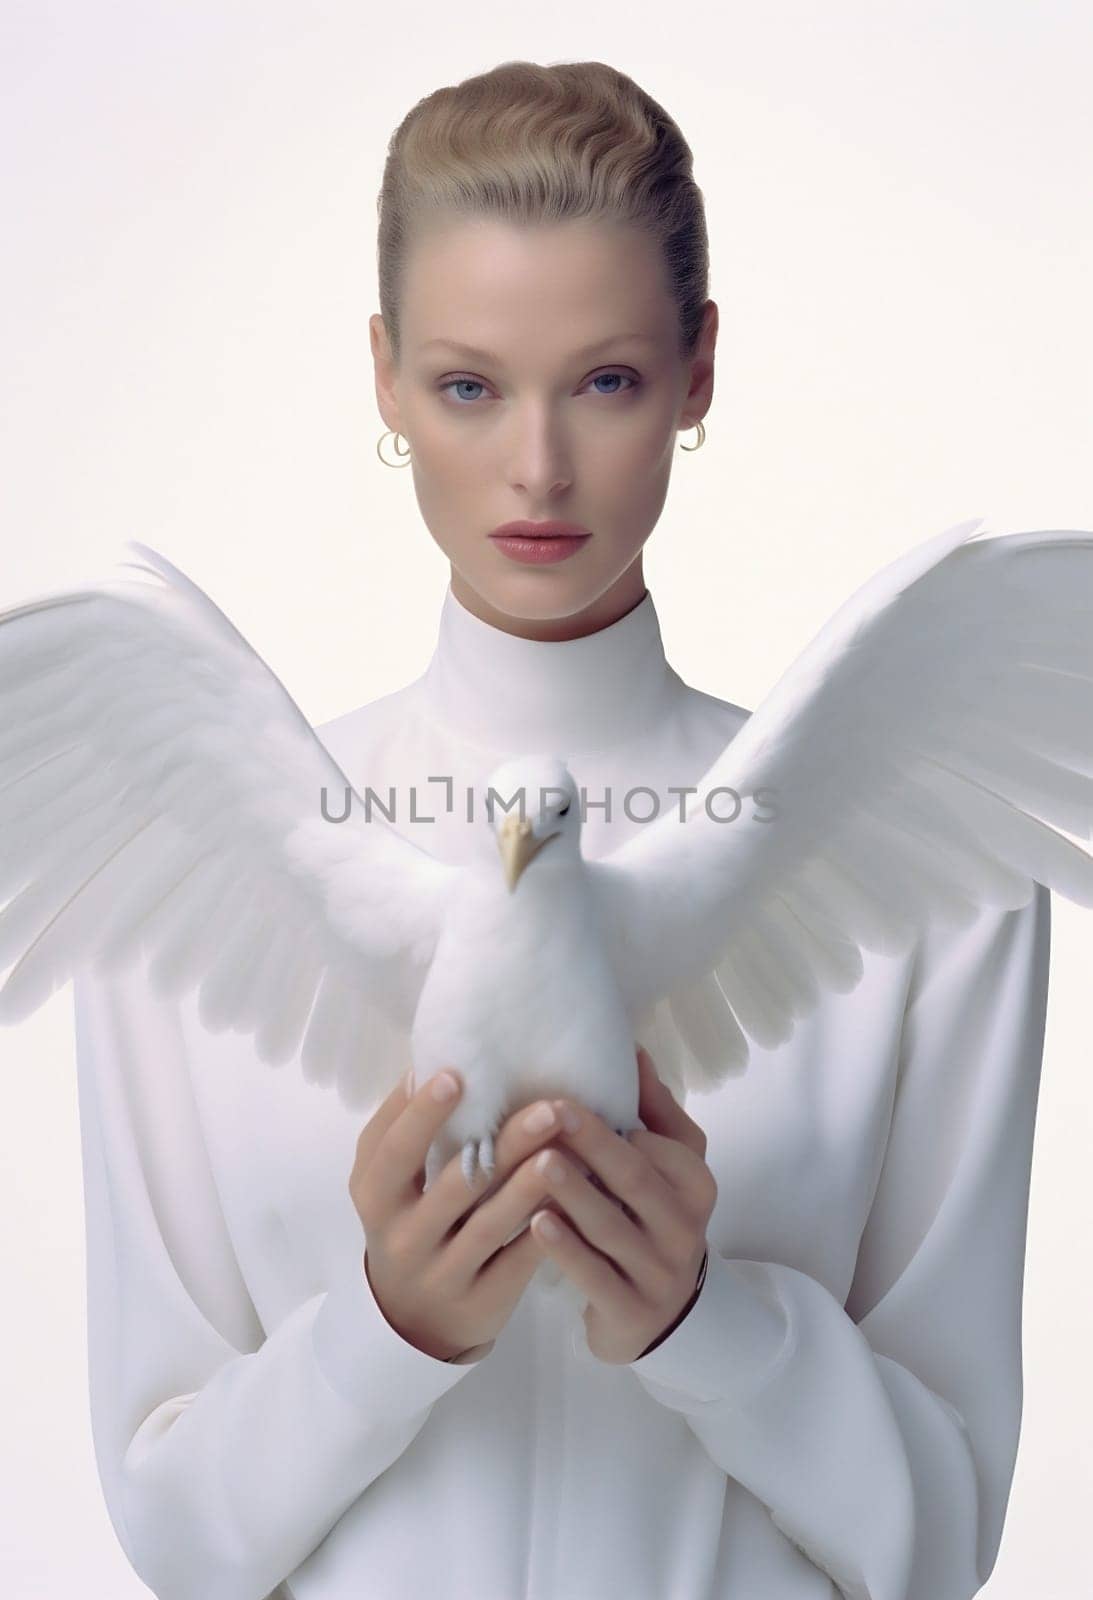 Woman animal fashion young one wings person angel white cute feather portrait beauty bird female lady pigeon dove purity heaven attractive